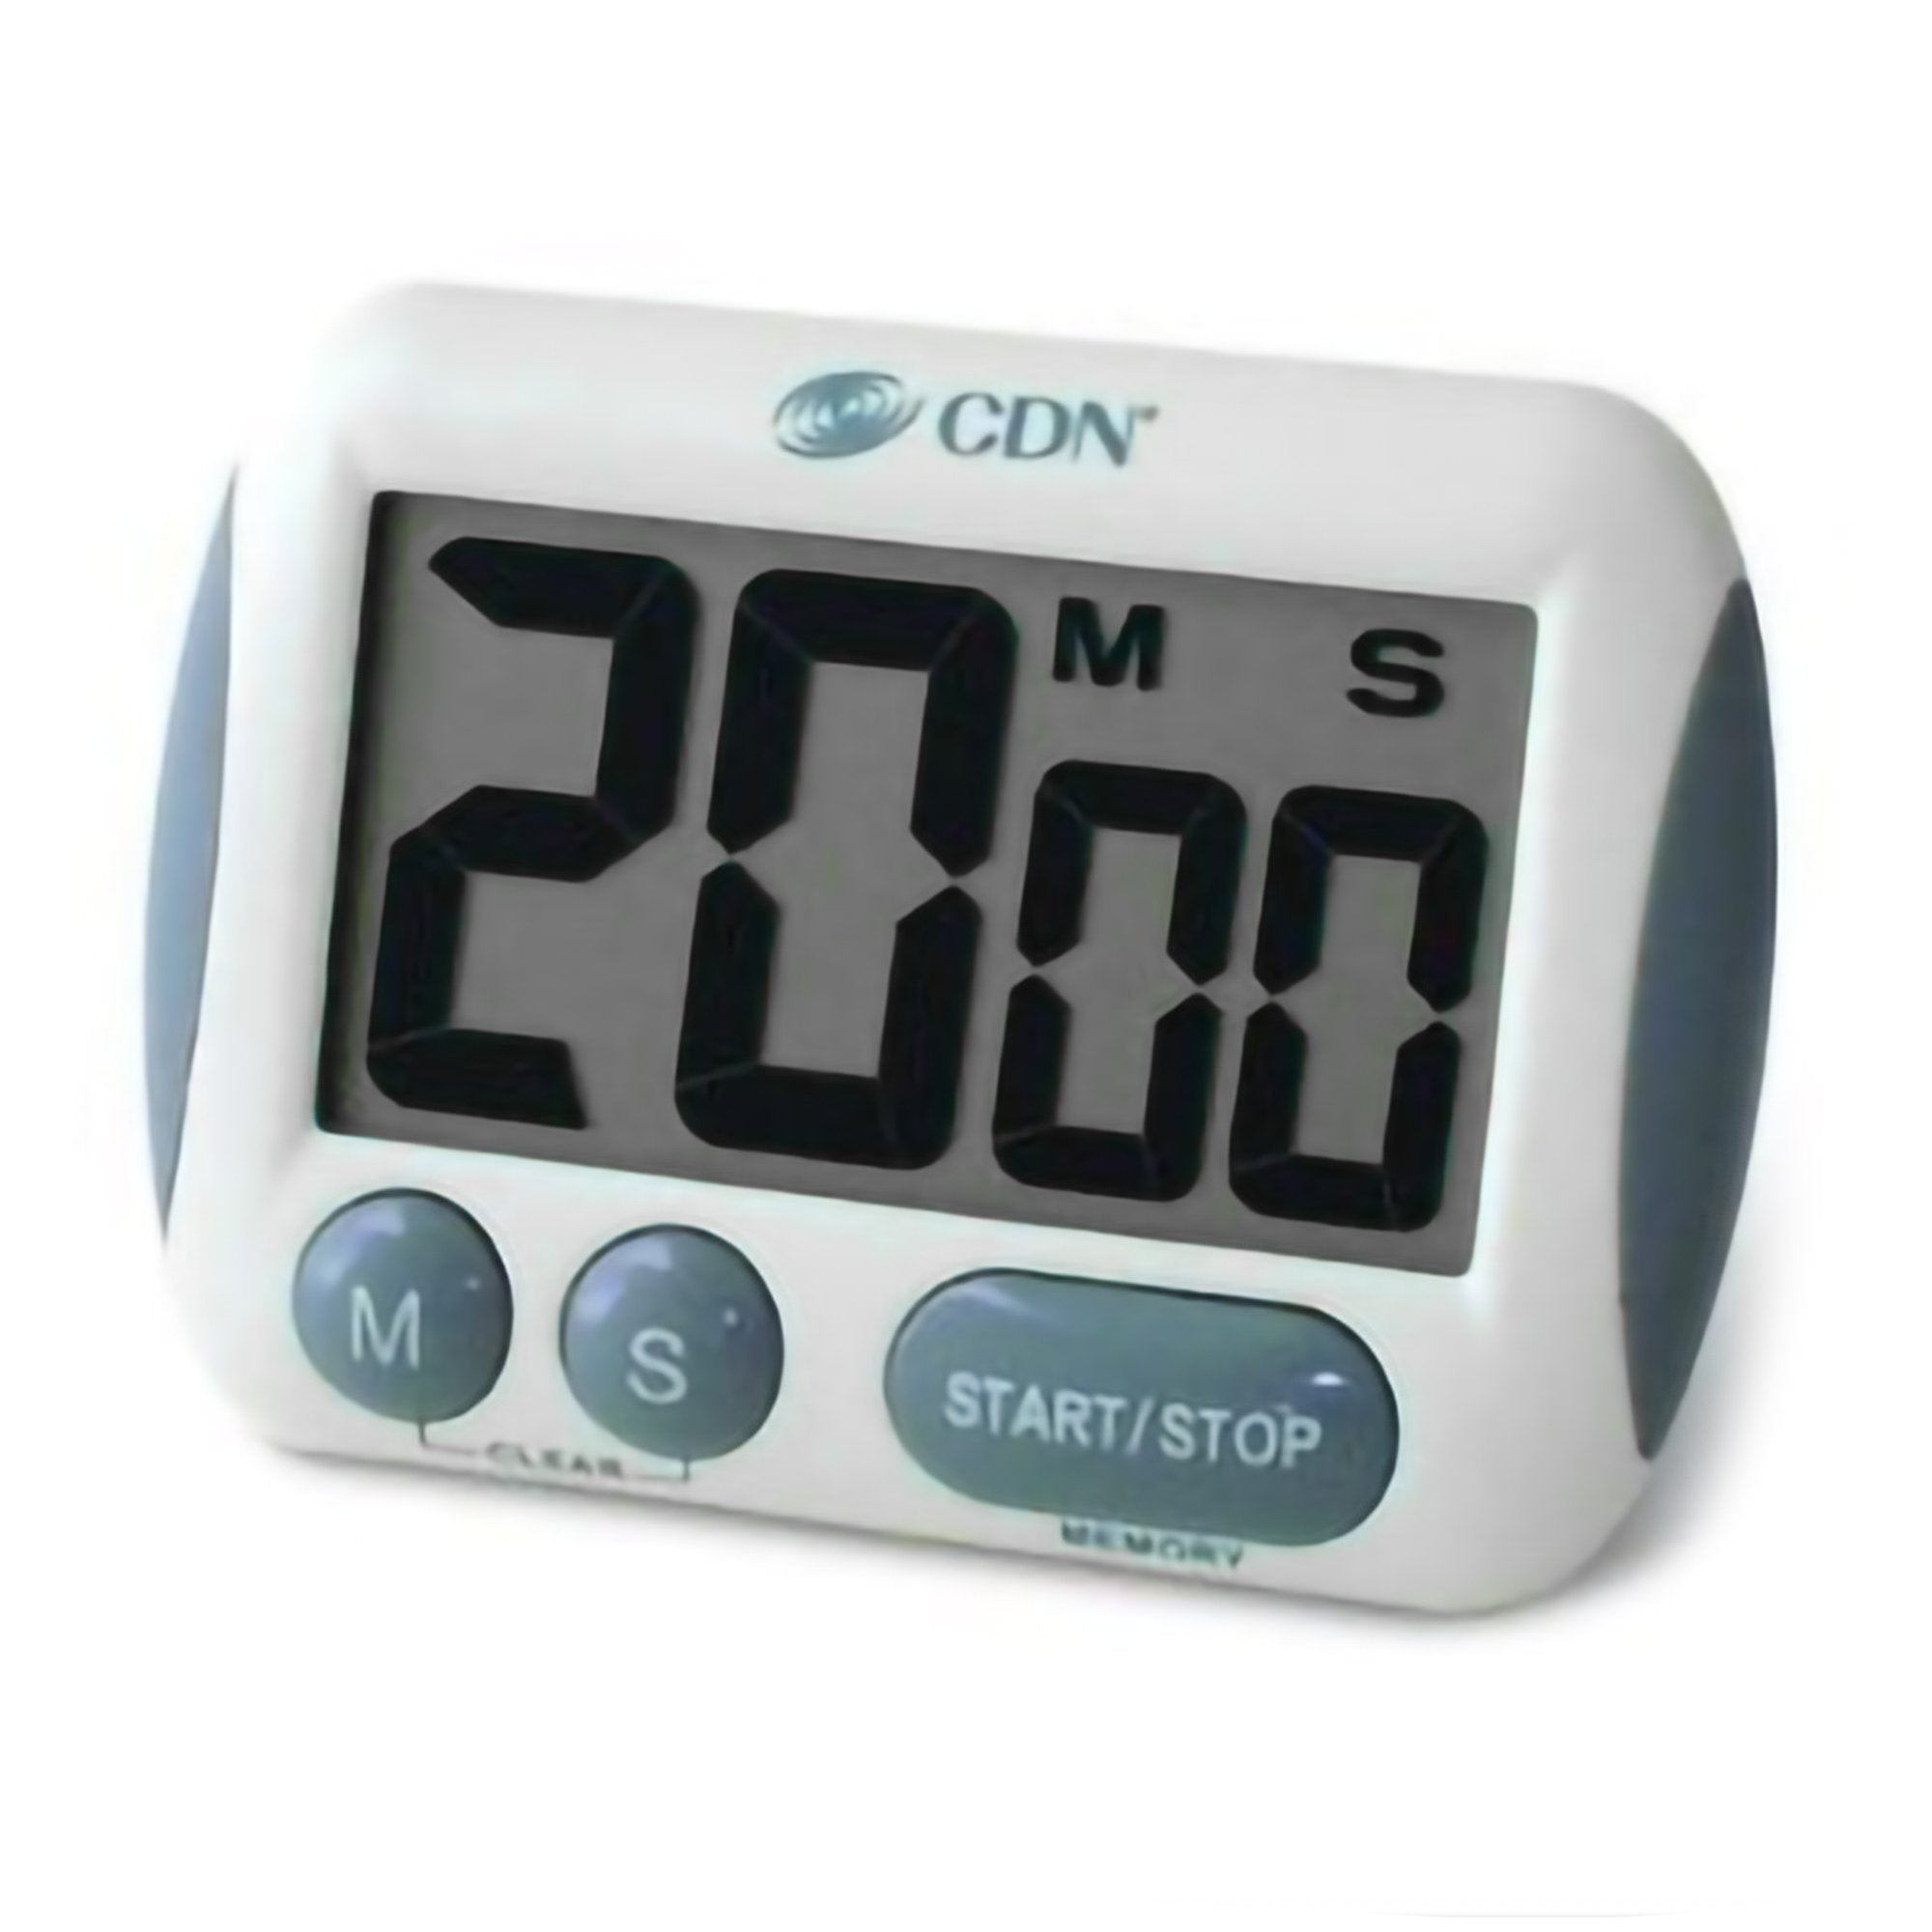 Electronic Alarm Timer Magnetic Back, Freestand, Mount with Alarm CDN® 100 Minutes LCD Display